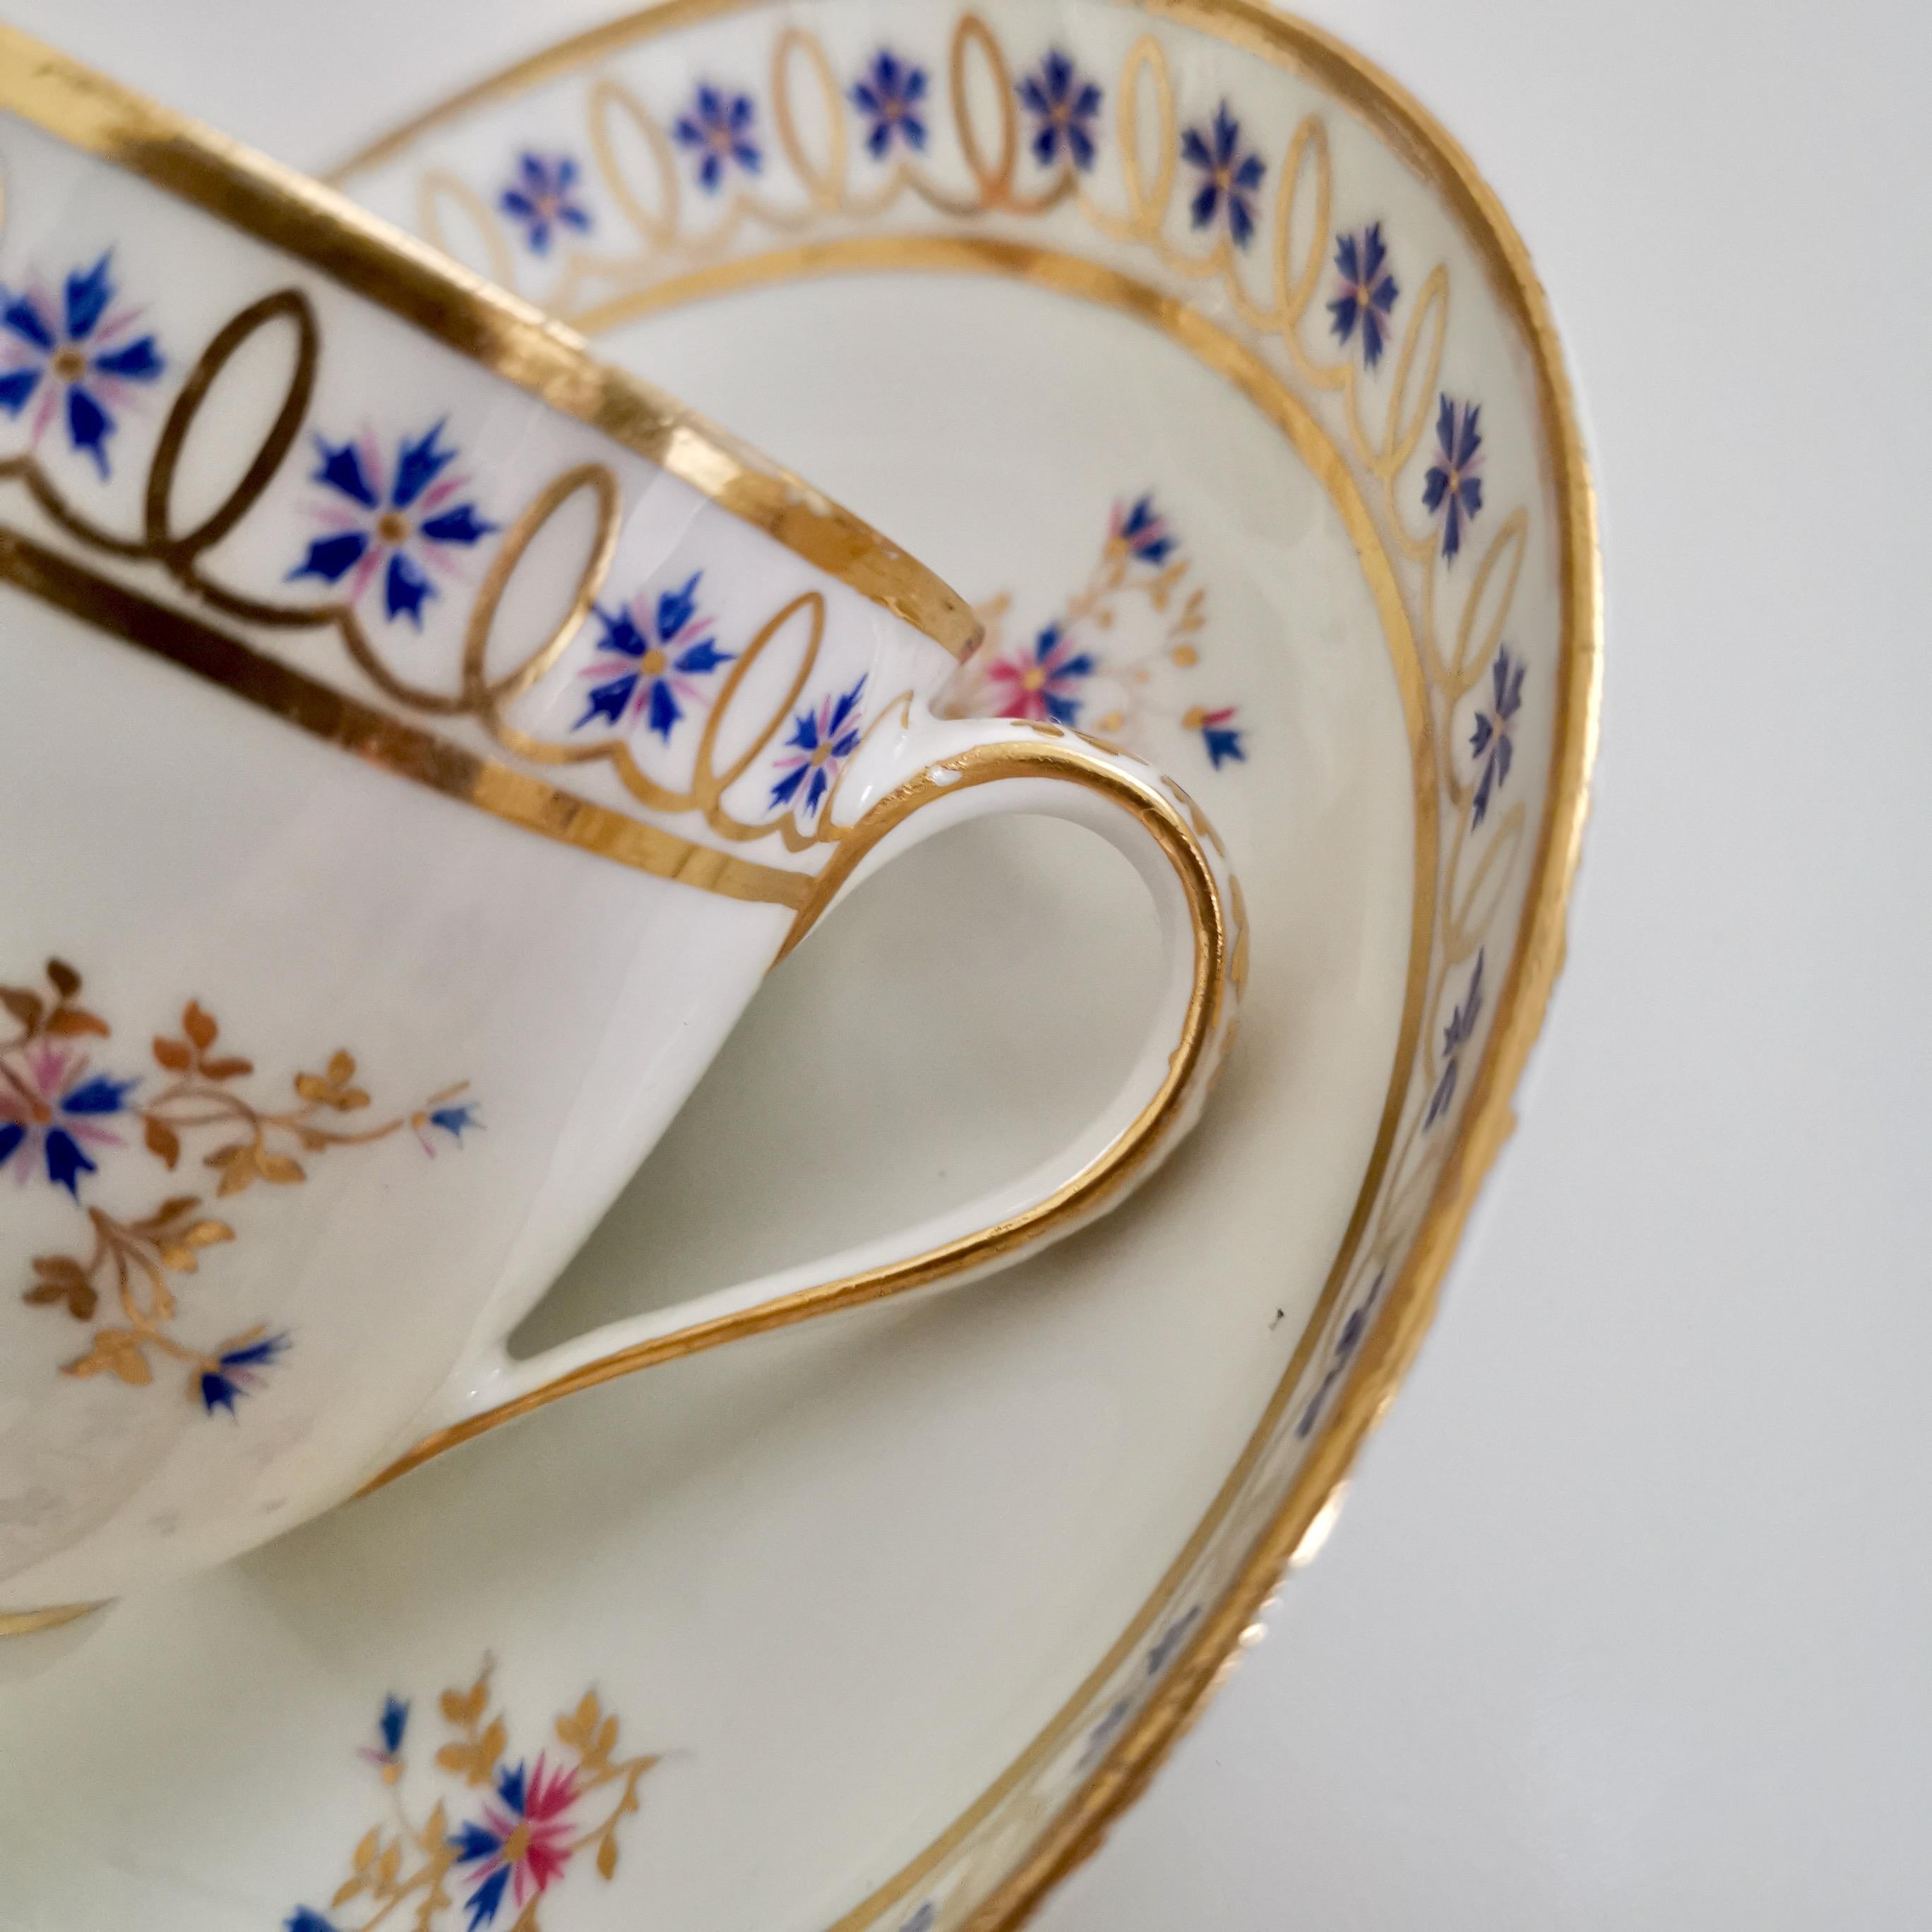 Crown Derby Porcelain Coffee Cup, White, Gilt with Blue Cornflowers, 1782-1790 2